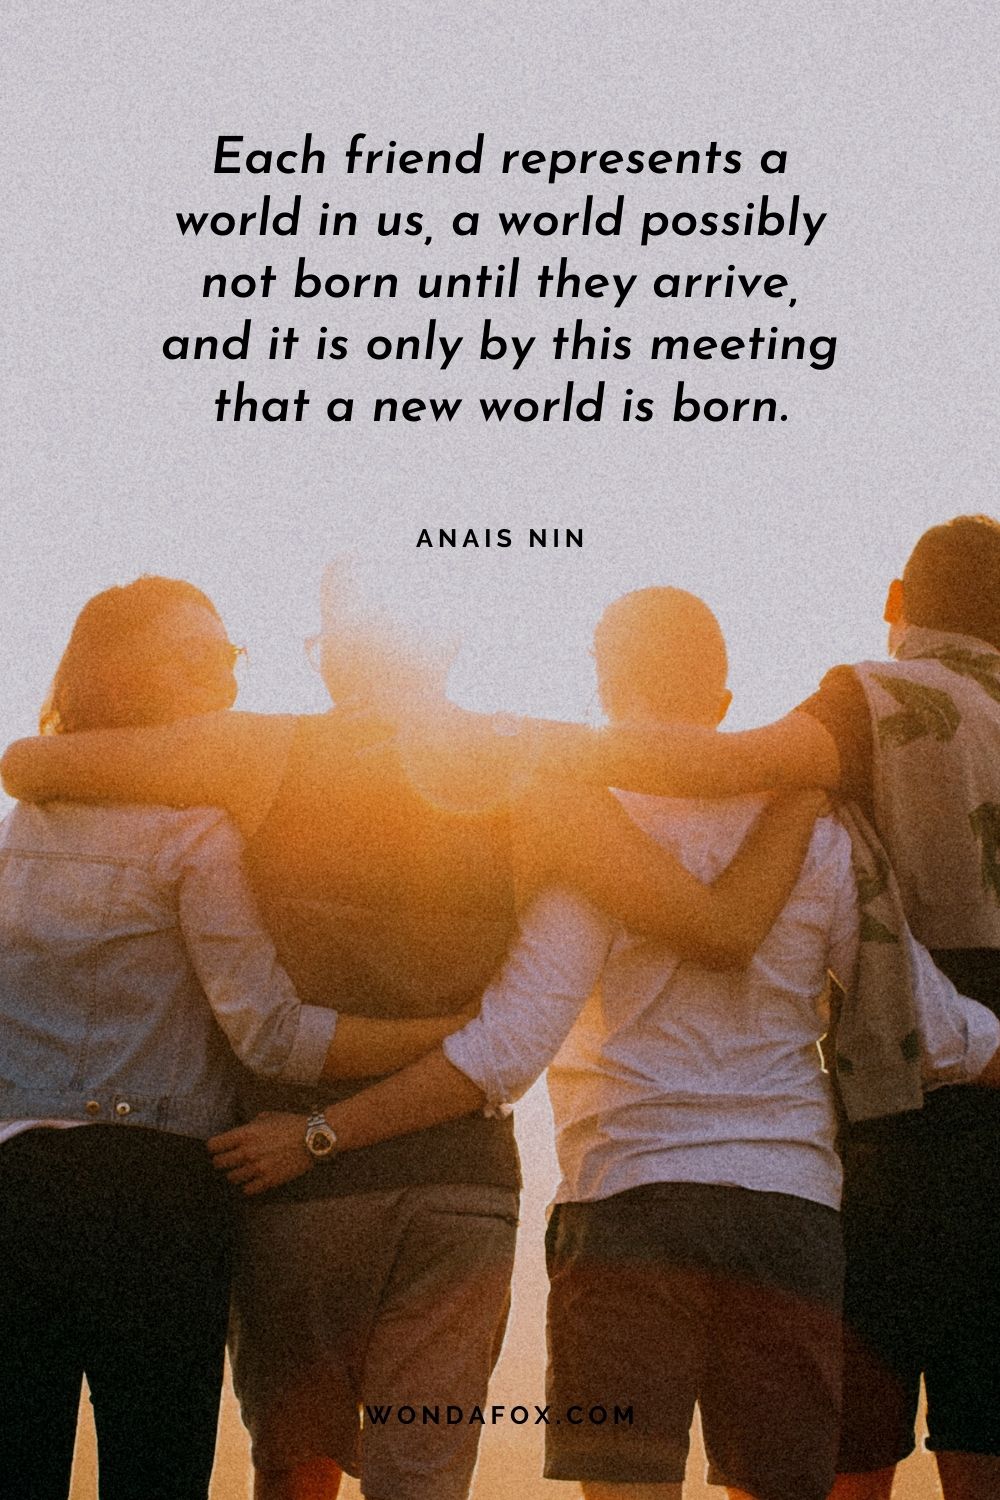 Each friend represents a world in us, a world possibly not born until they arrive, and it is only by this meeting that a new world is born.